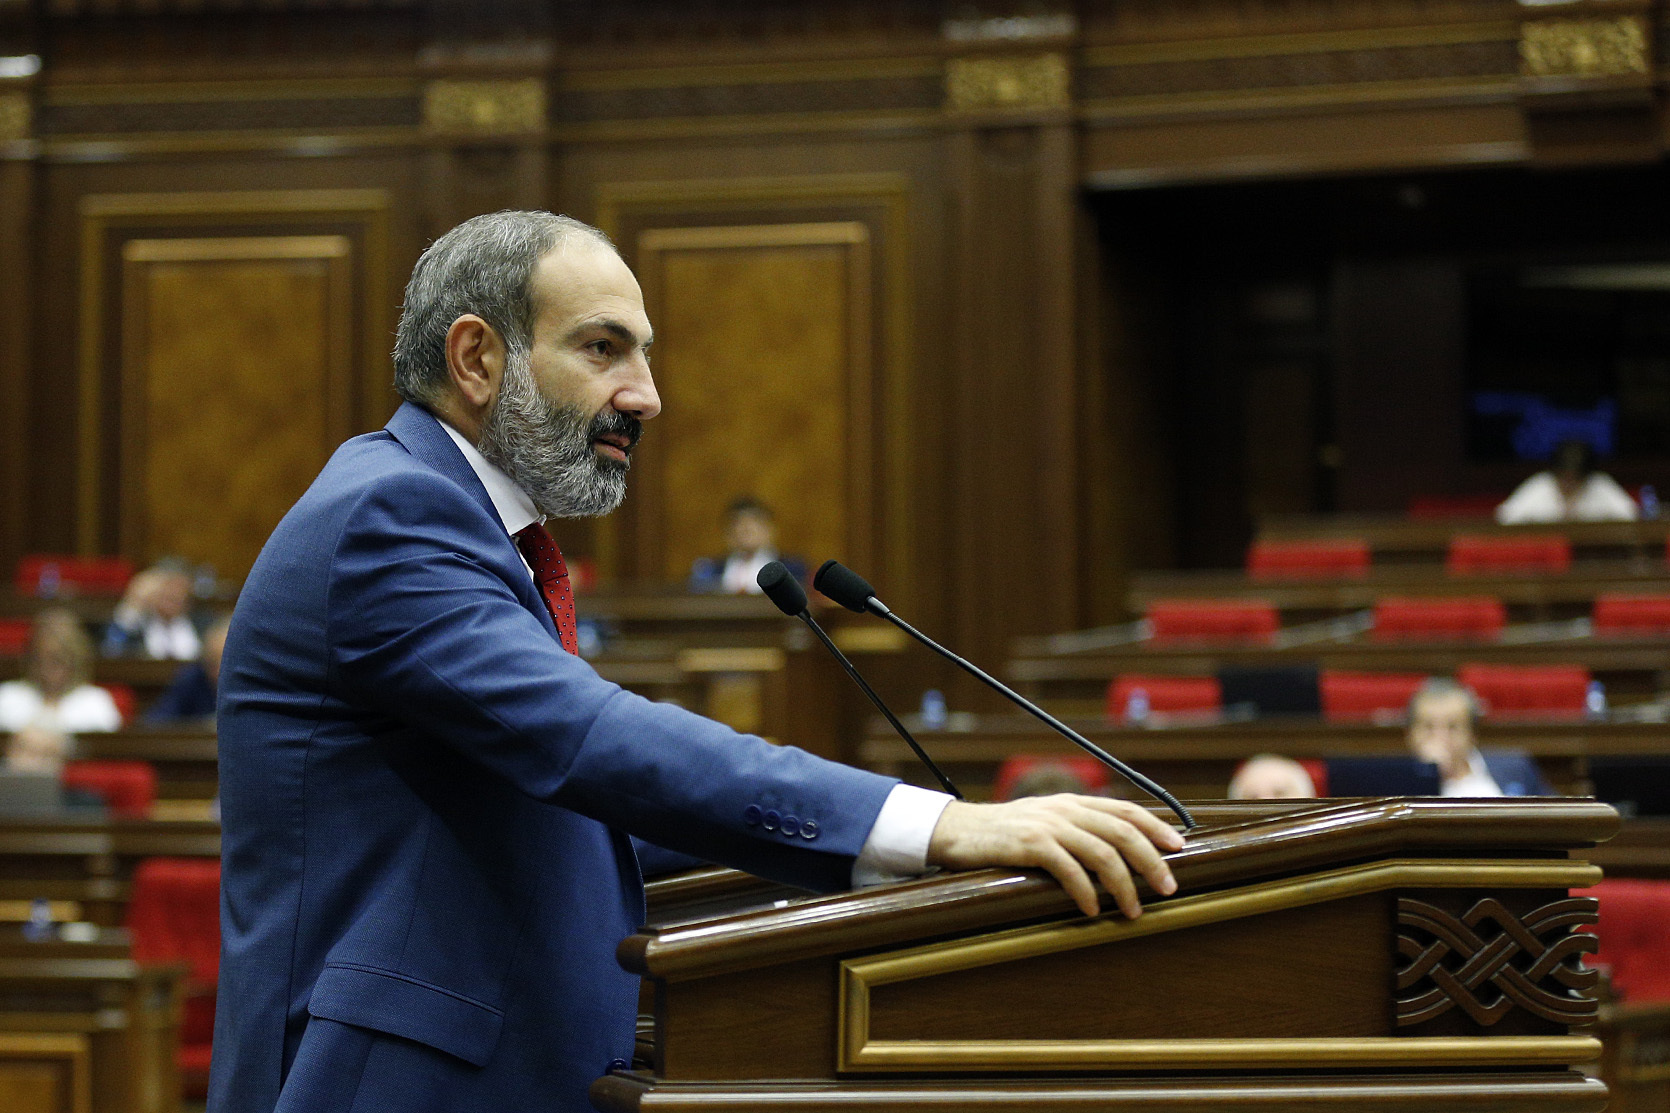 Pashinyan on the reasons for the escalation